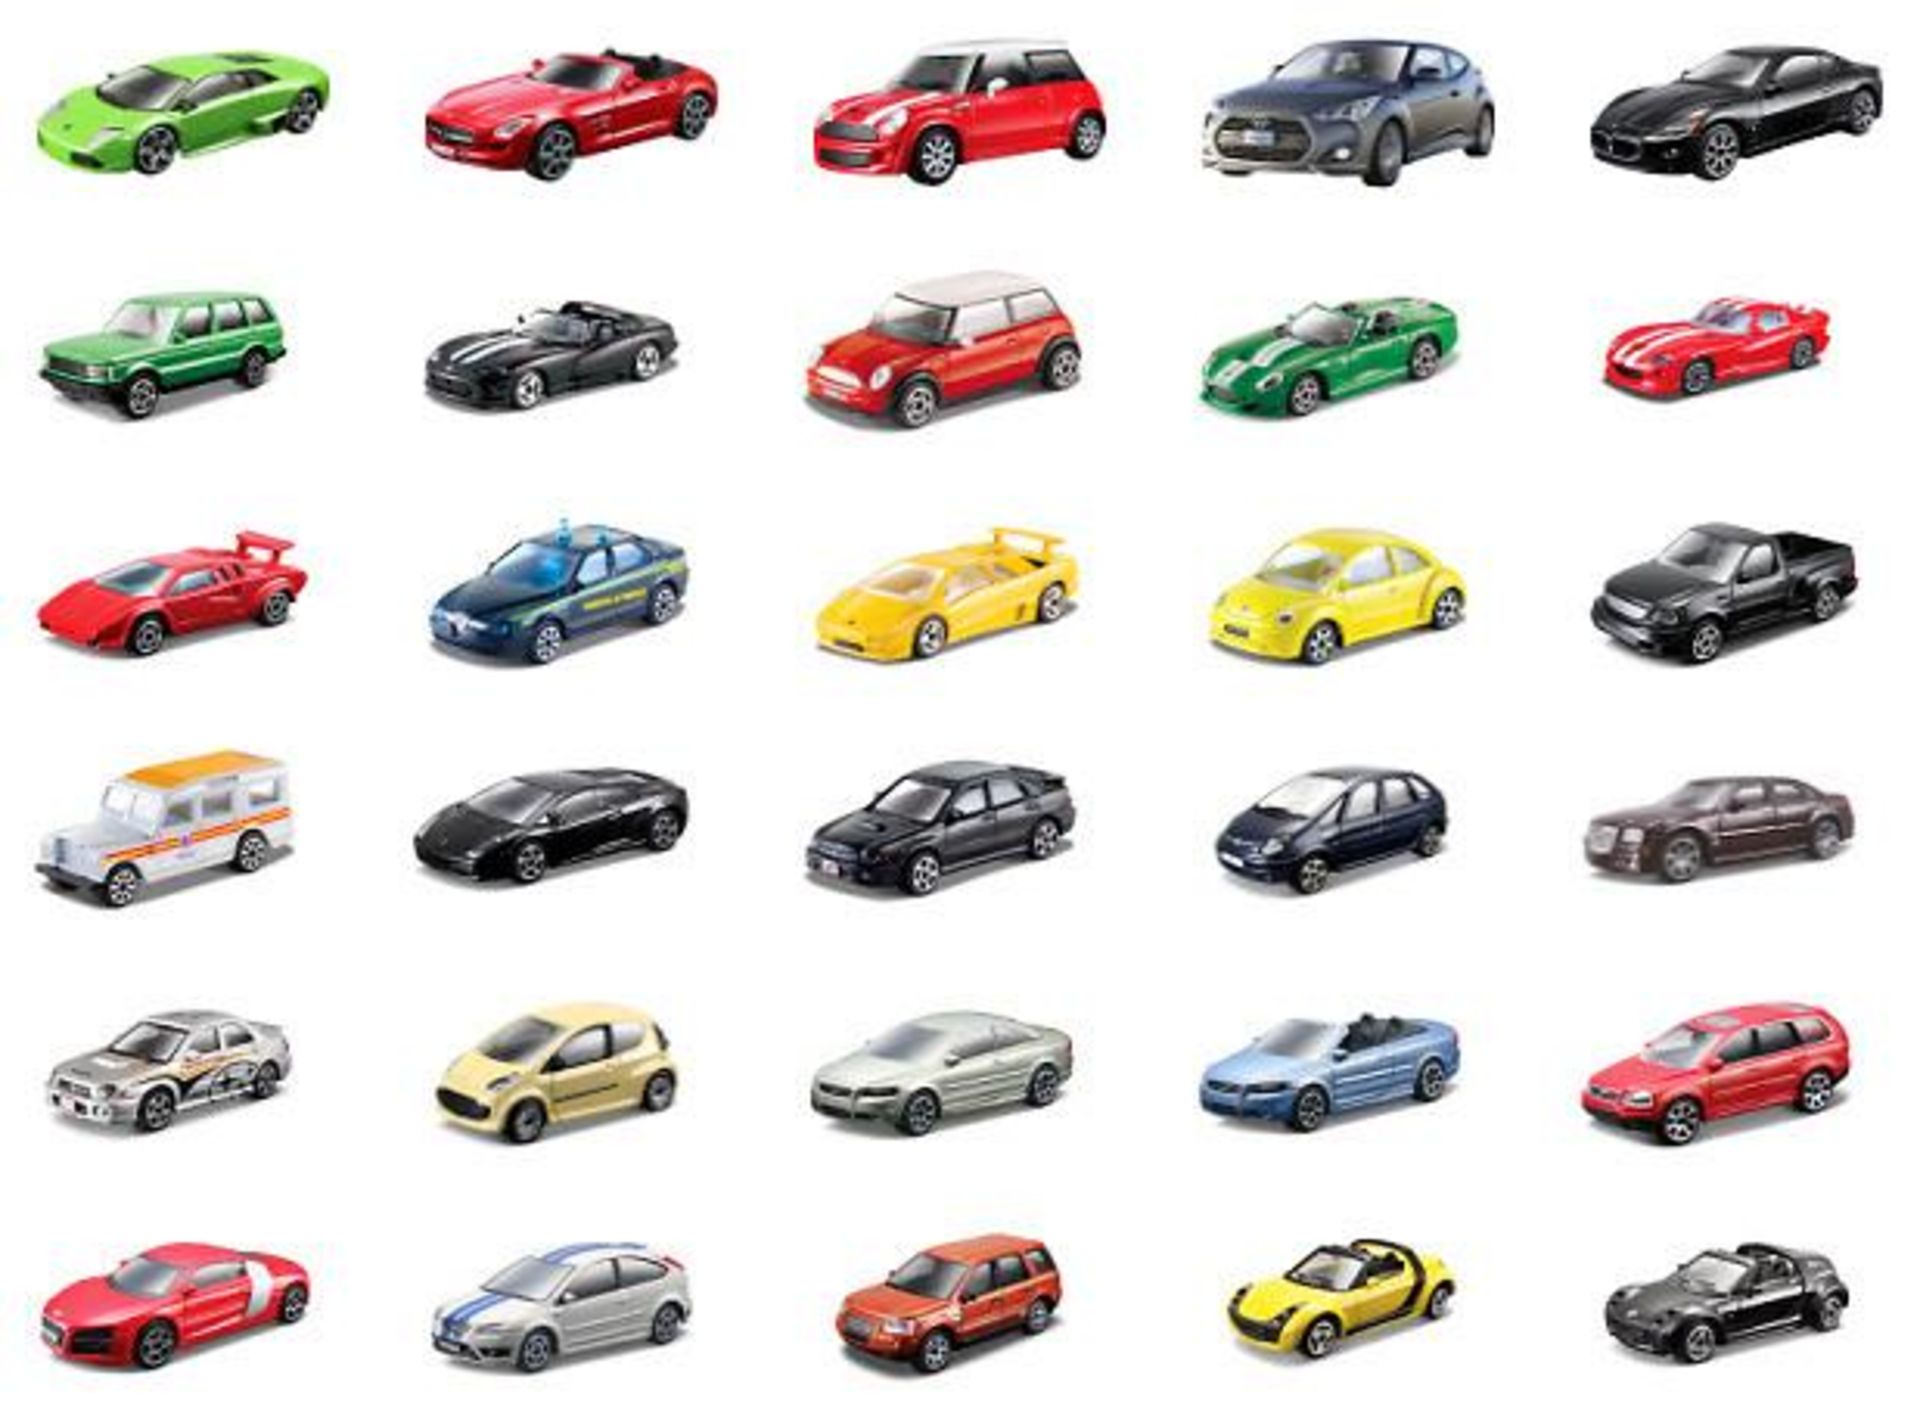 V *TRADE QTY* Brand New Lot of Six Burago Toy Cars 1/43 Scale (cars May Vary from Image - For